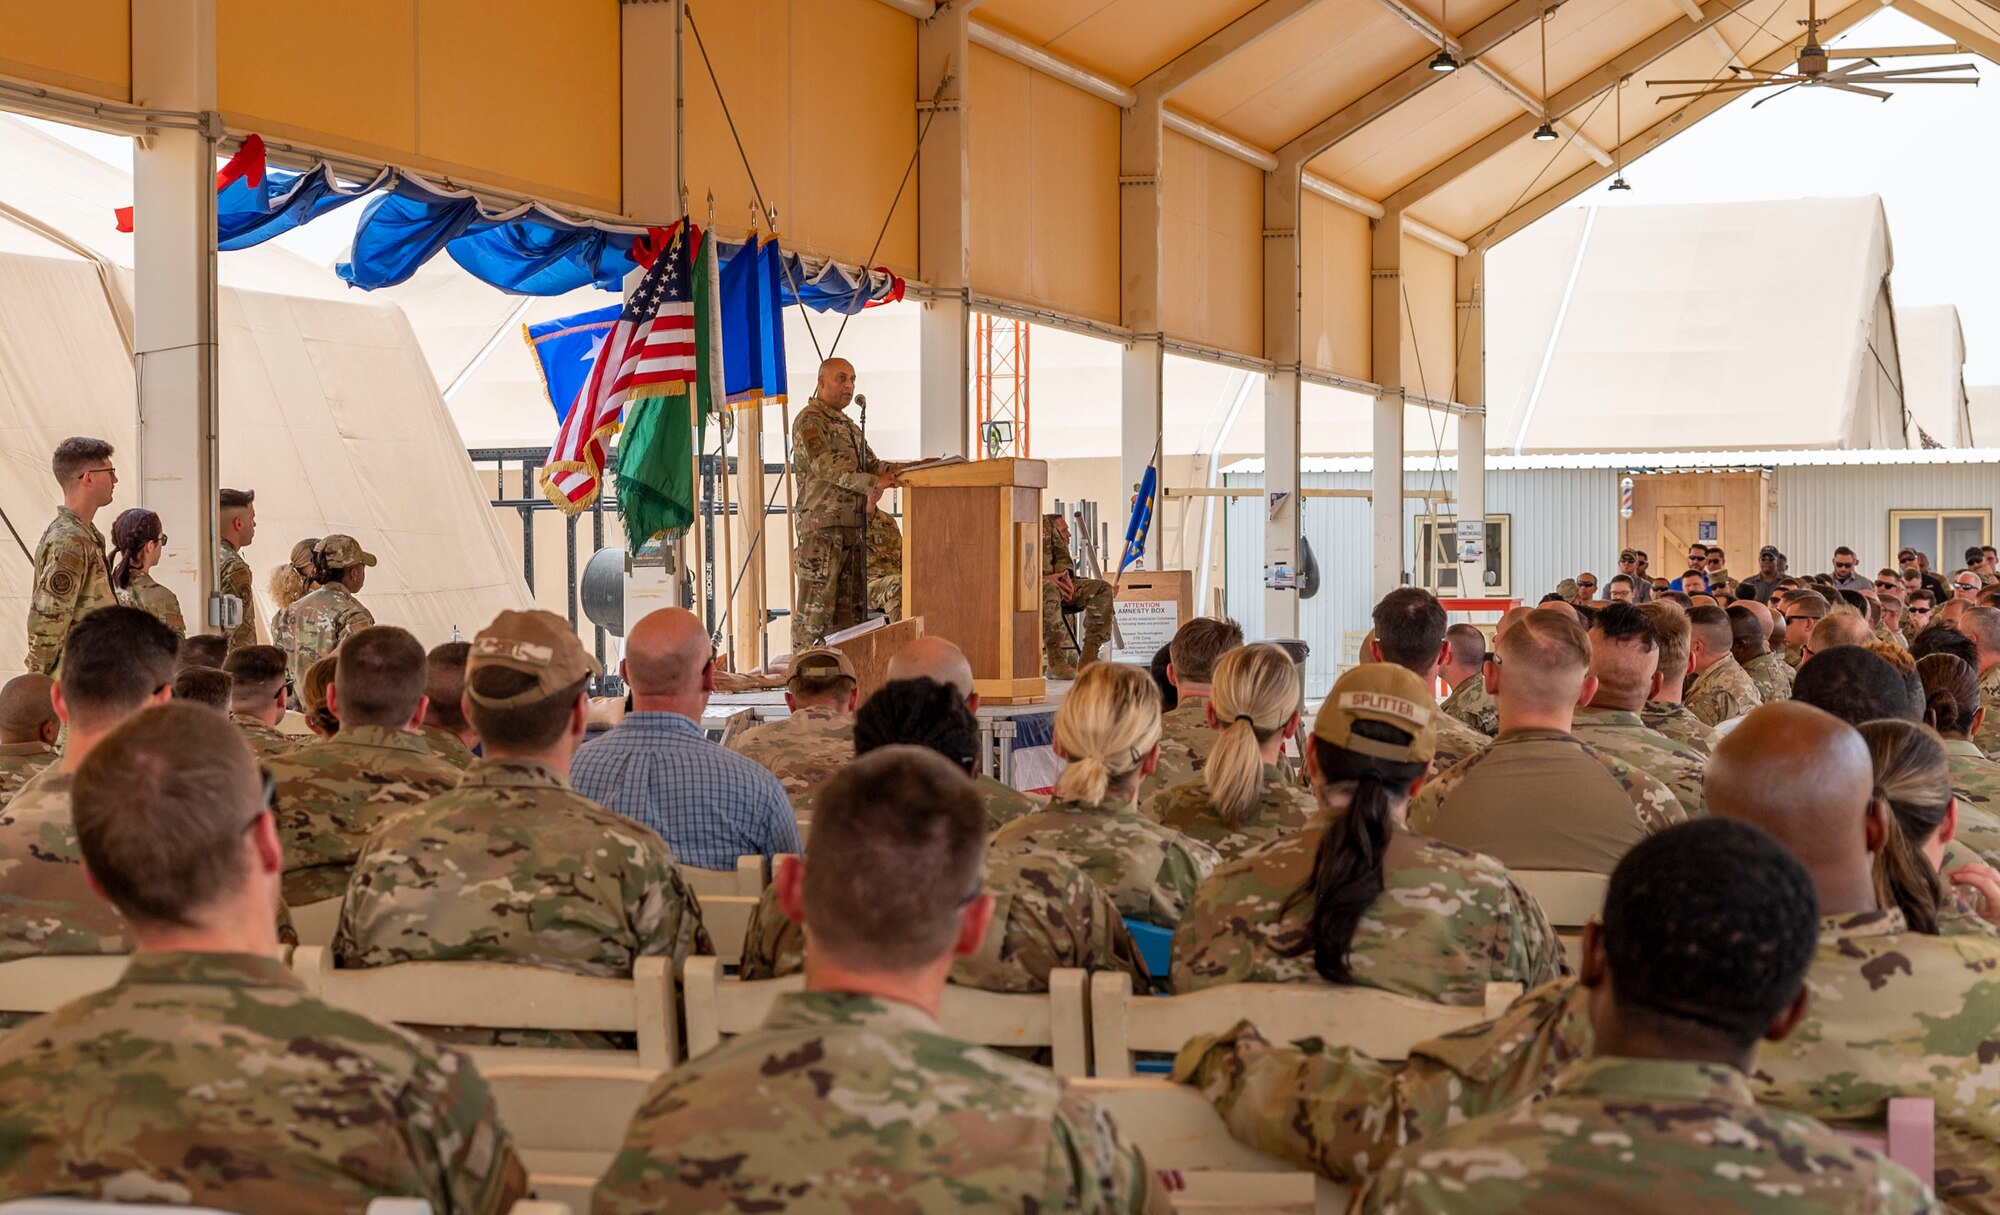 U.S. Air Force Brig. Gen. Akshai Gandhi, incoming commander of the 378th Air Expeditionary Wing, speaks during a change of command ceremony at Prince Sultan Air Base, Kingdom of Saudi Arabia, May 18, 2023. During the ceremony, Brig. Gen. William Betts relinquished command of the 378th AEW to Gandhi. The tradition of change of command ceremonies are to allow service members to witness their new leader assume the responsibility and trust associated with the position of commander. (U.S. Air Force photo by Senior Airman Stephani Barge)